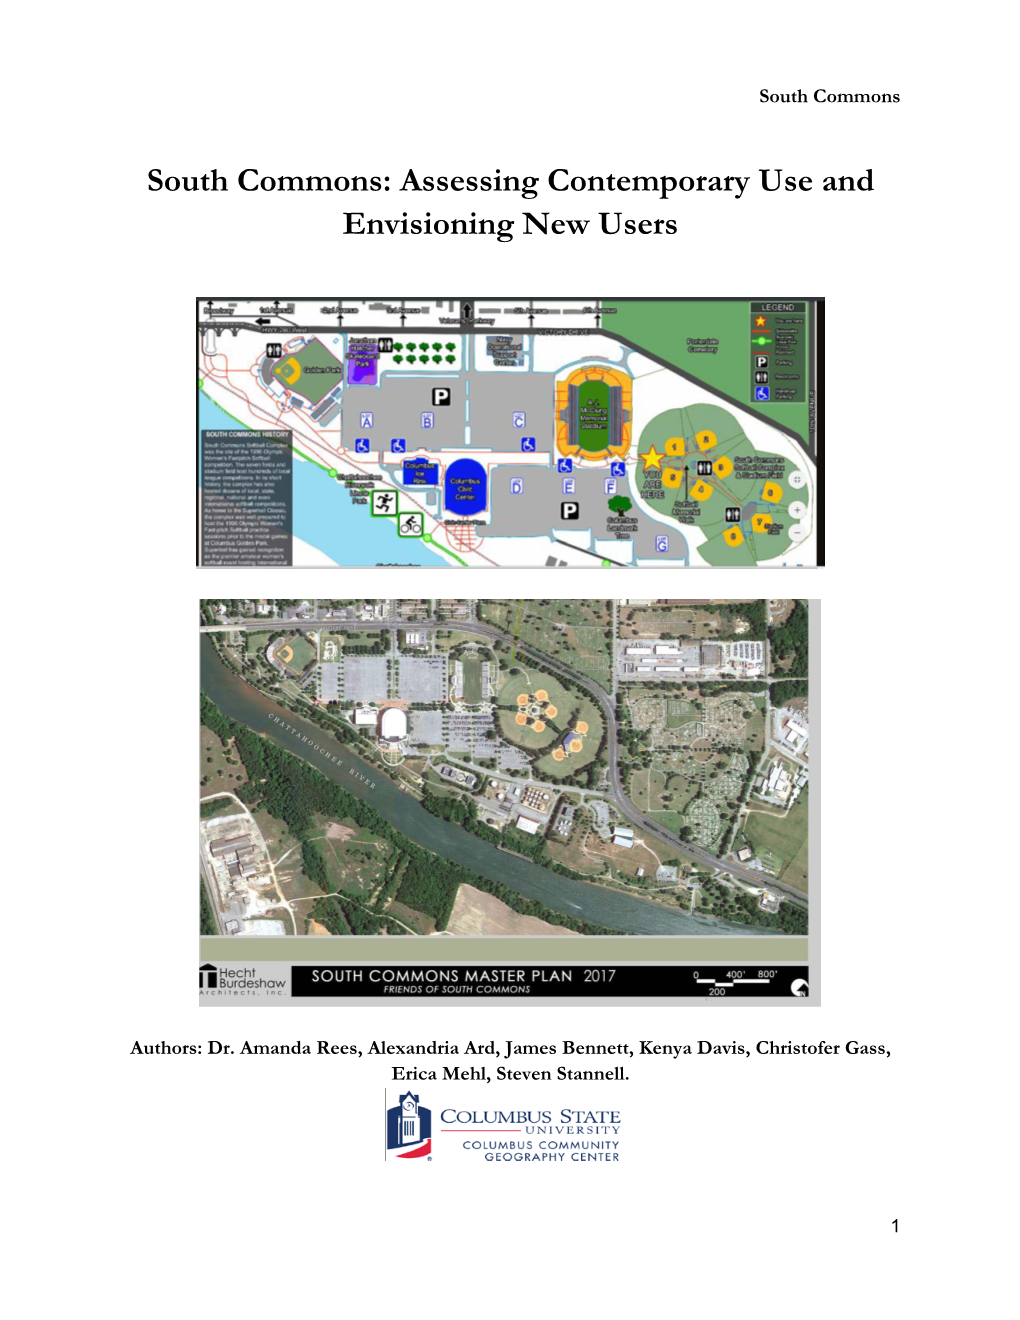 South Commons: Assessing Contemporary Use and Envisioning New Users